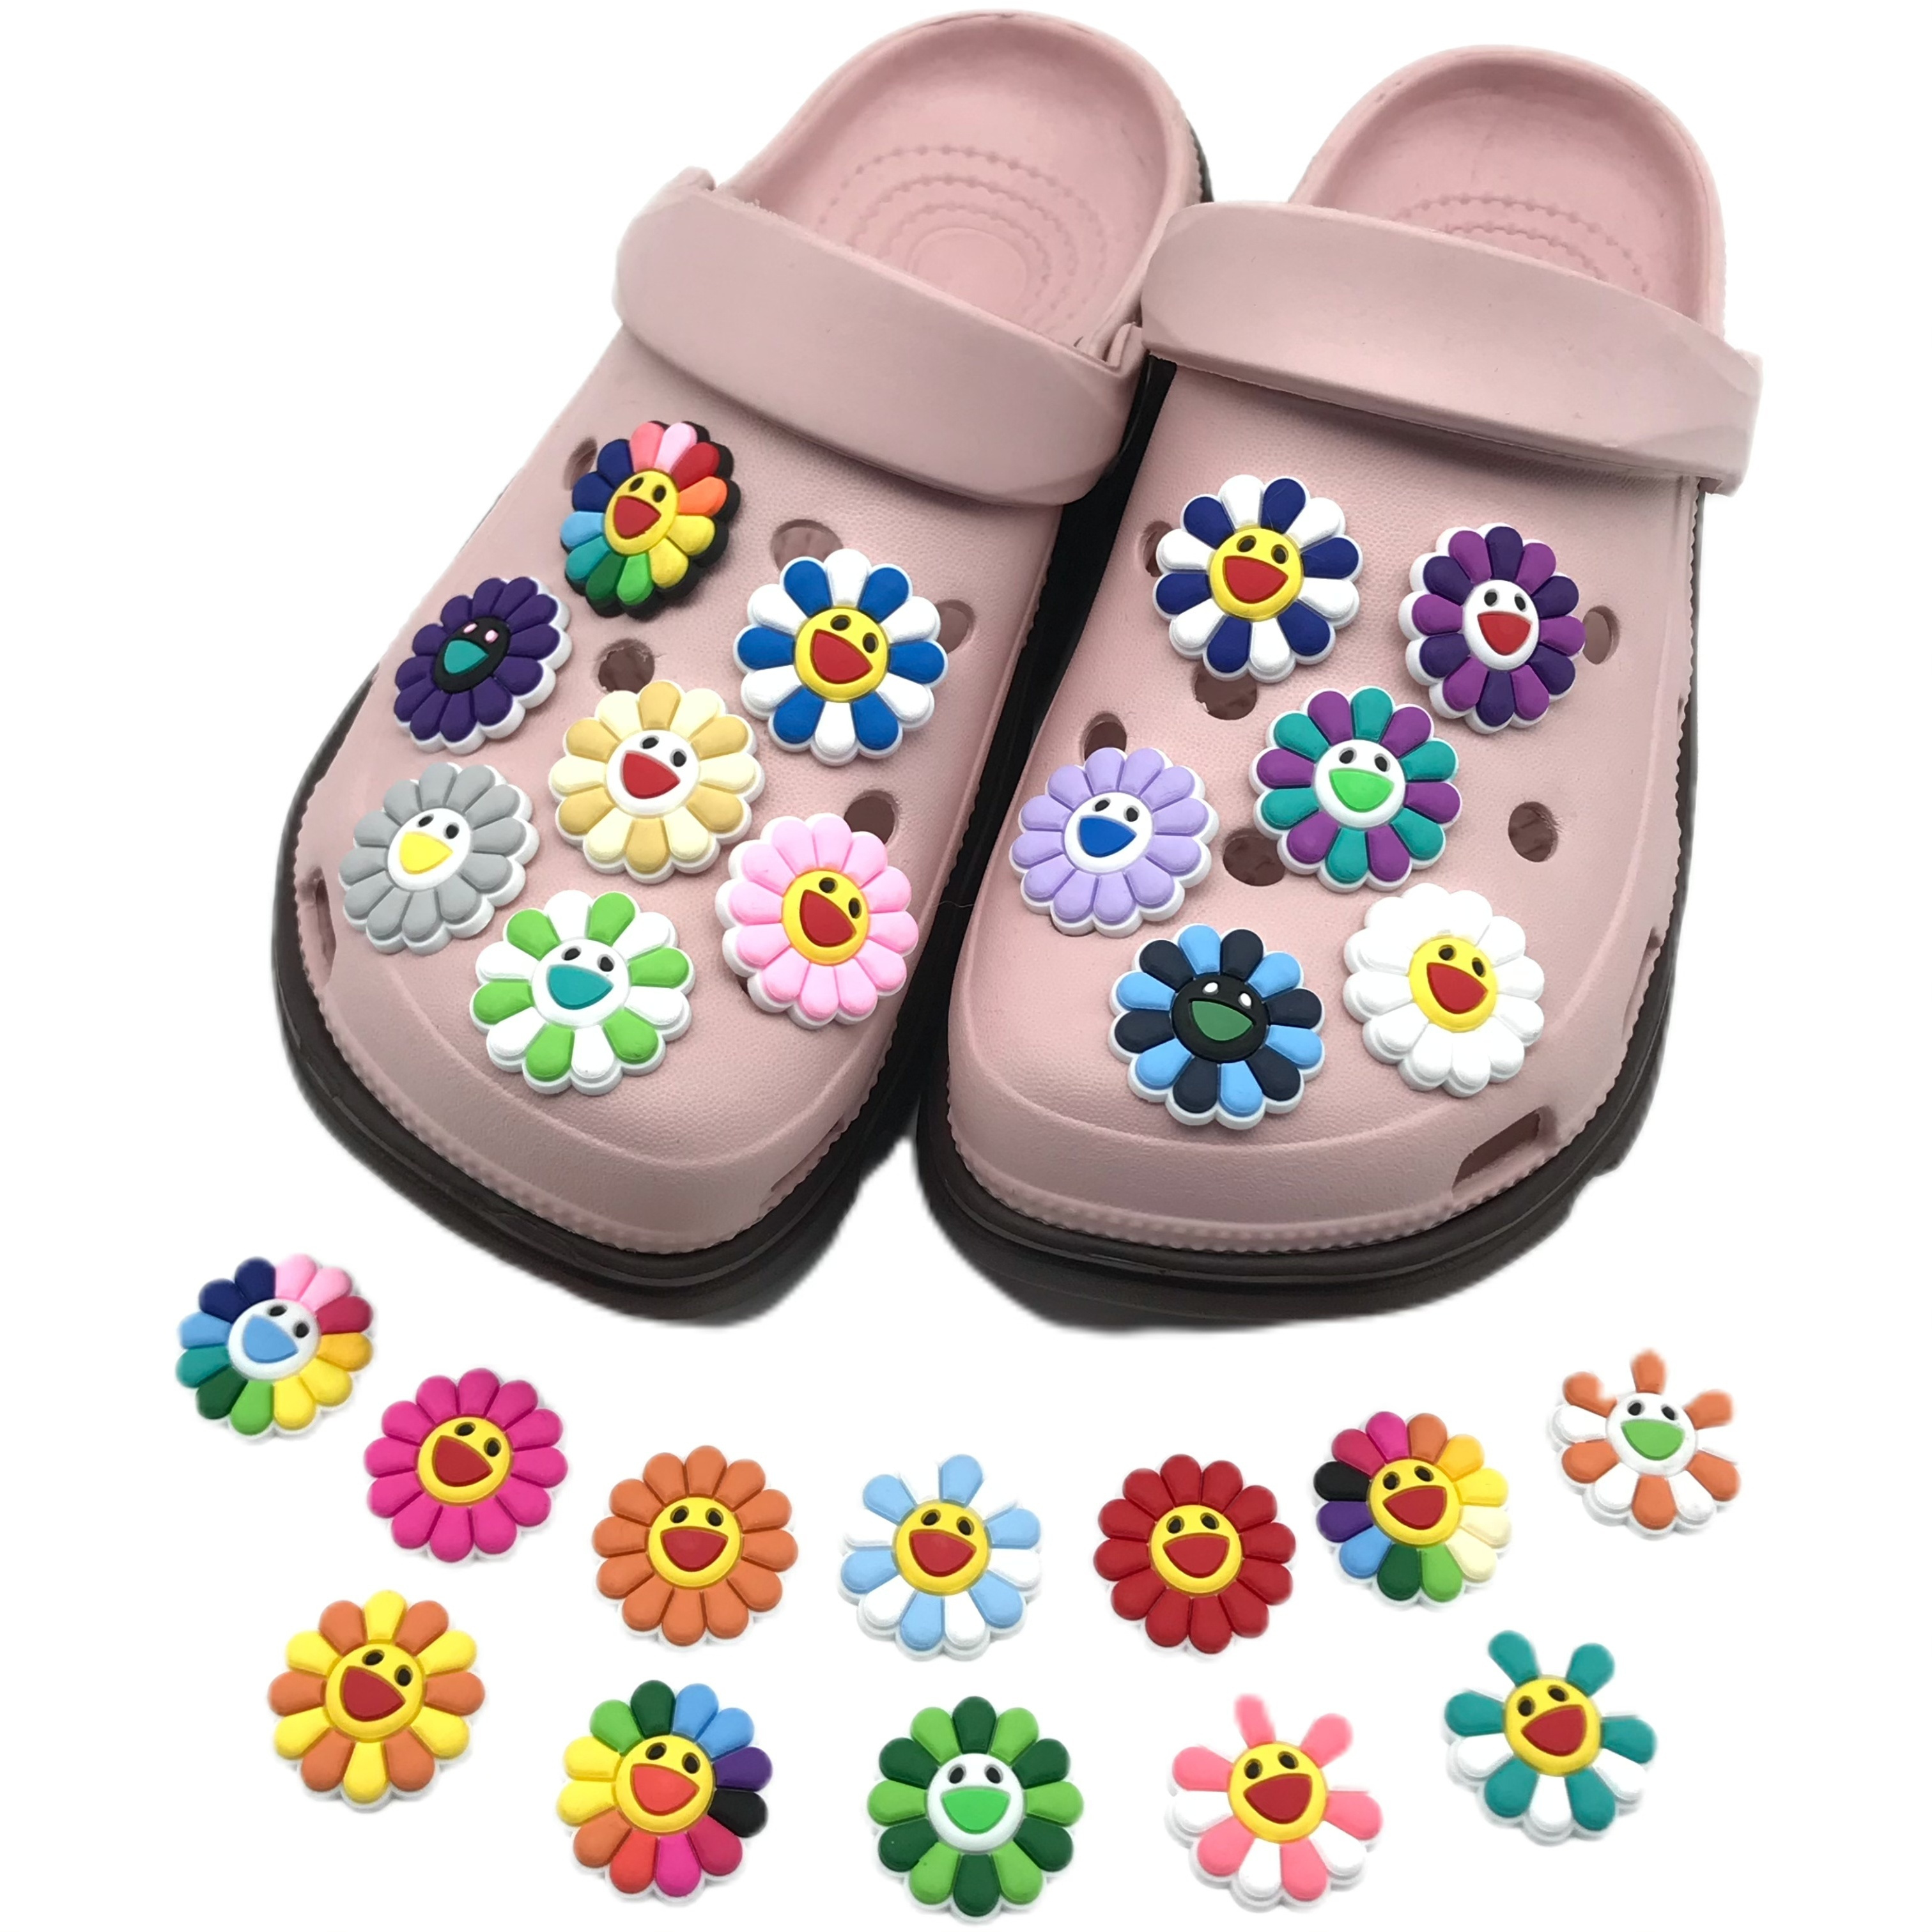 Mardi Gras Clog Charms PVC Decoration Shoe Decoration Charms For Party  Favors And Gifts Drop Delivery Available From Crocdhshoe, $0.11